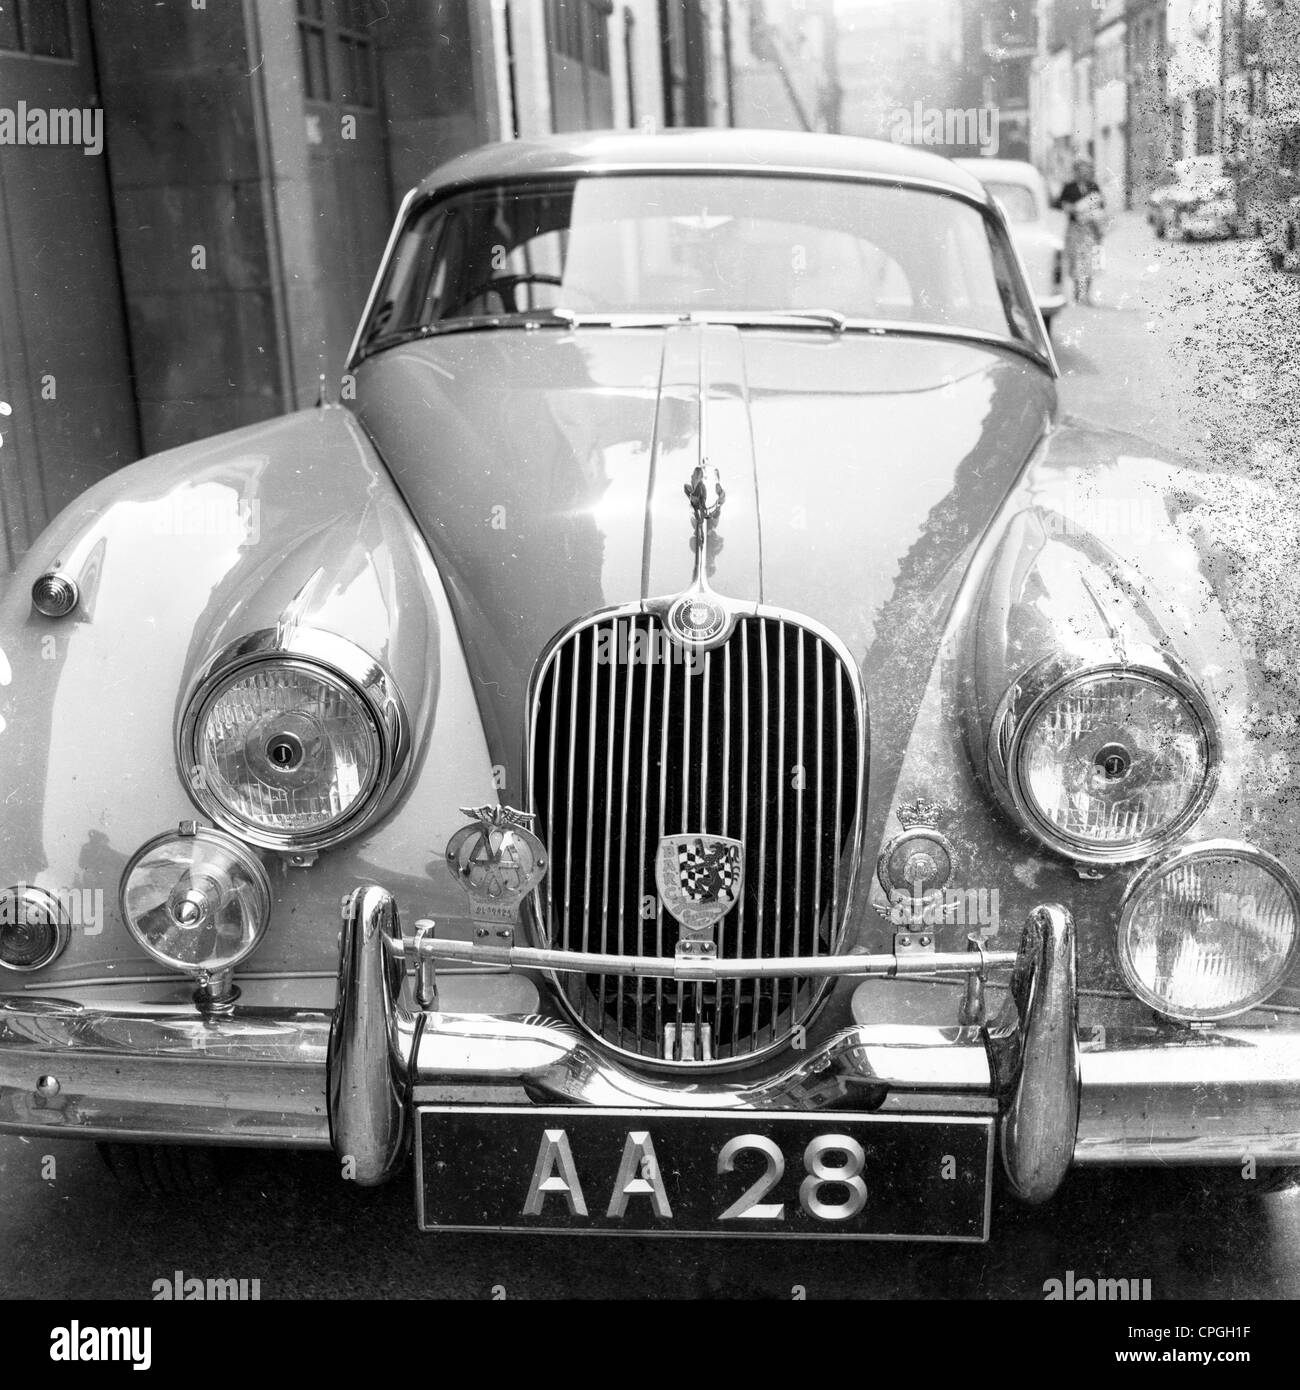 Historical, 1960s. Front view of sports car showing grill and head-lights with number plate AA 28. Stock Photo